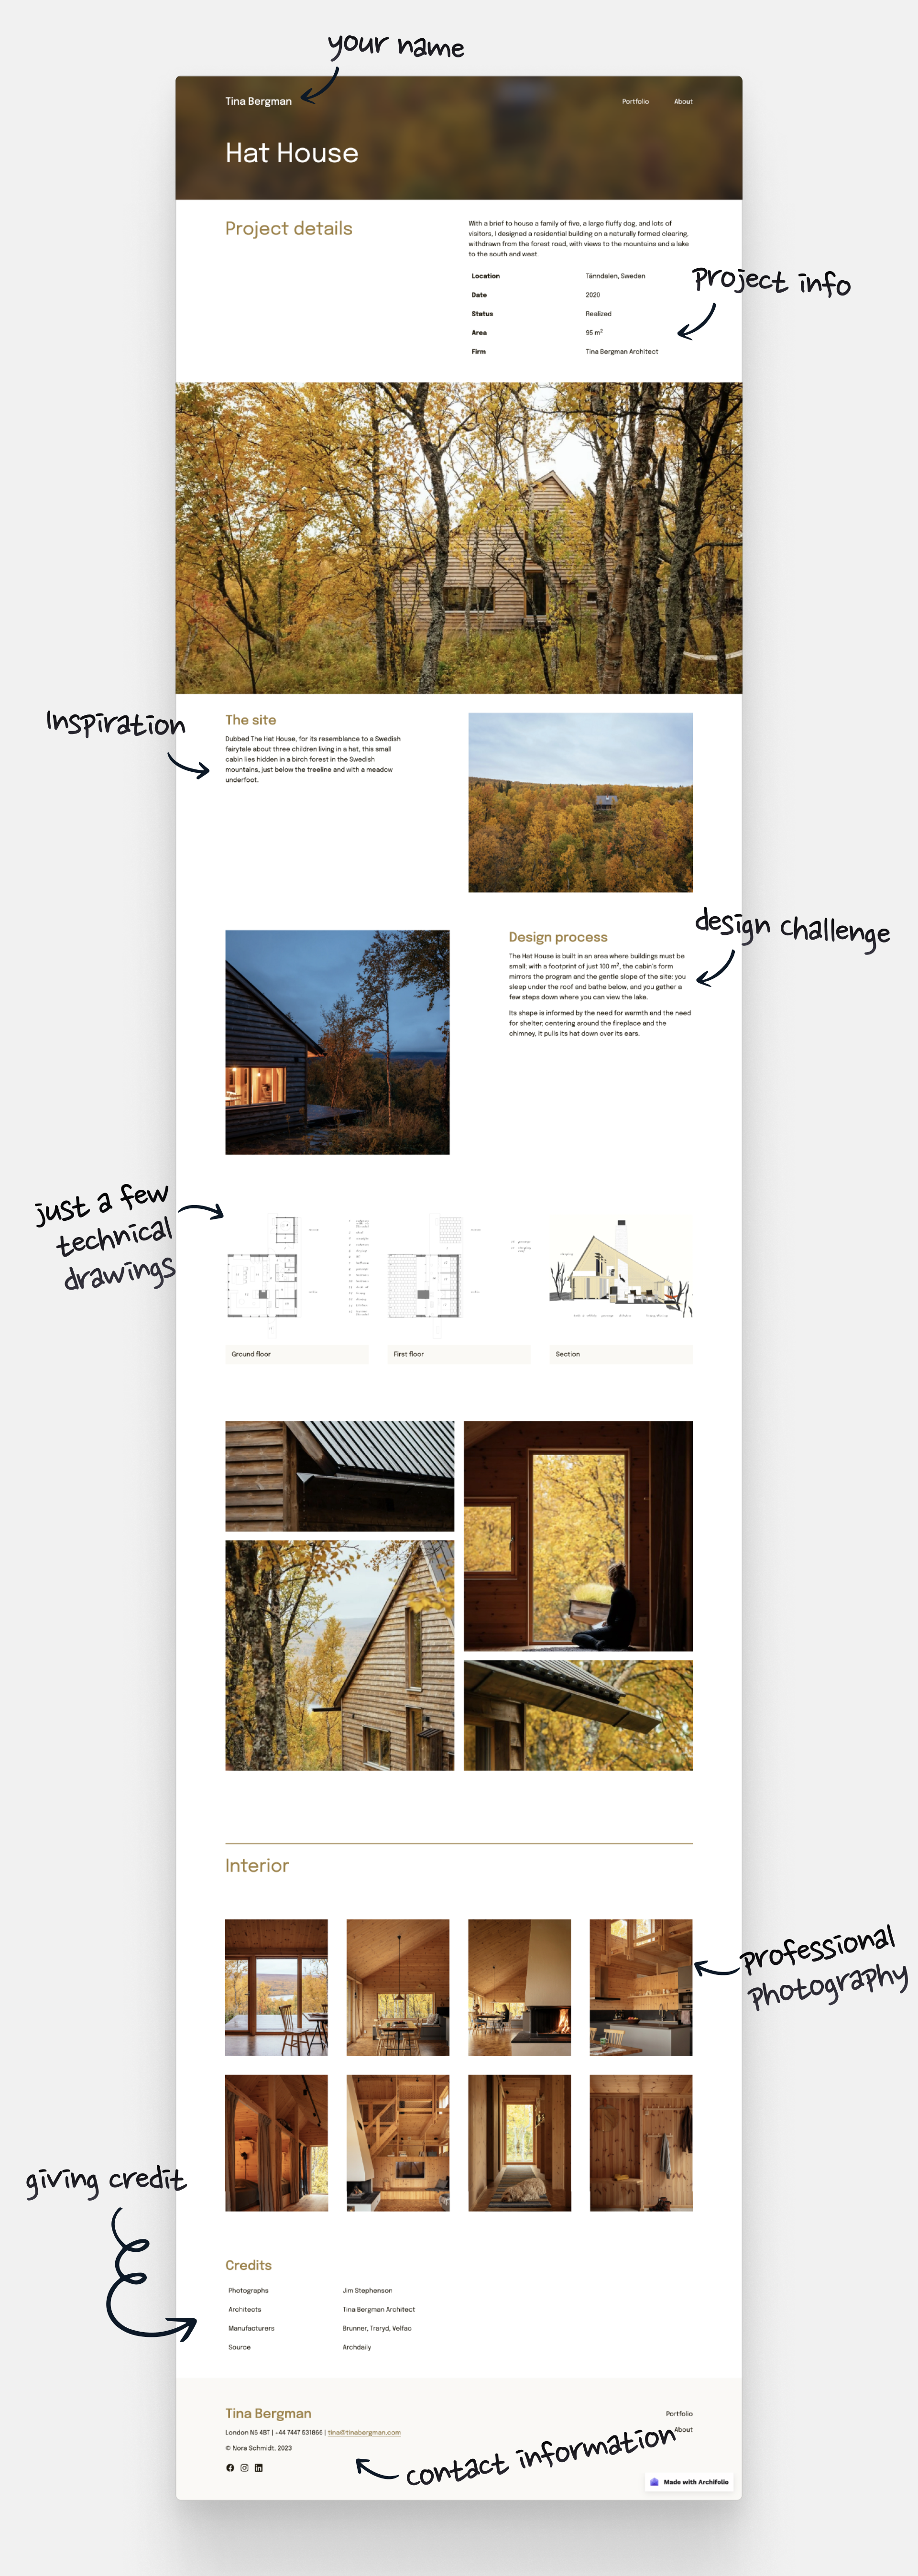 A screenshot of a residential architecture portfolio's project page